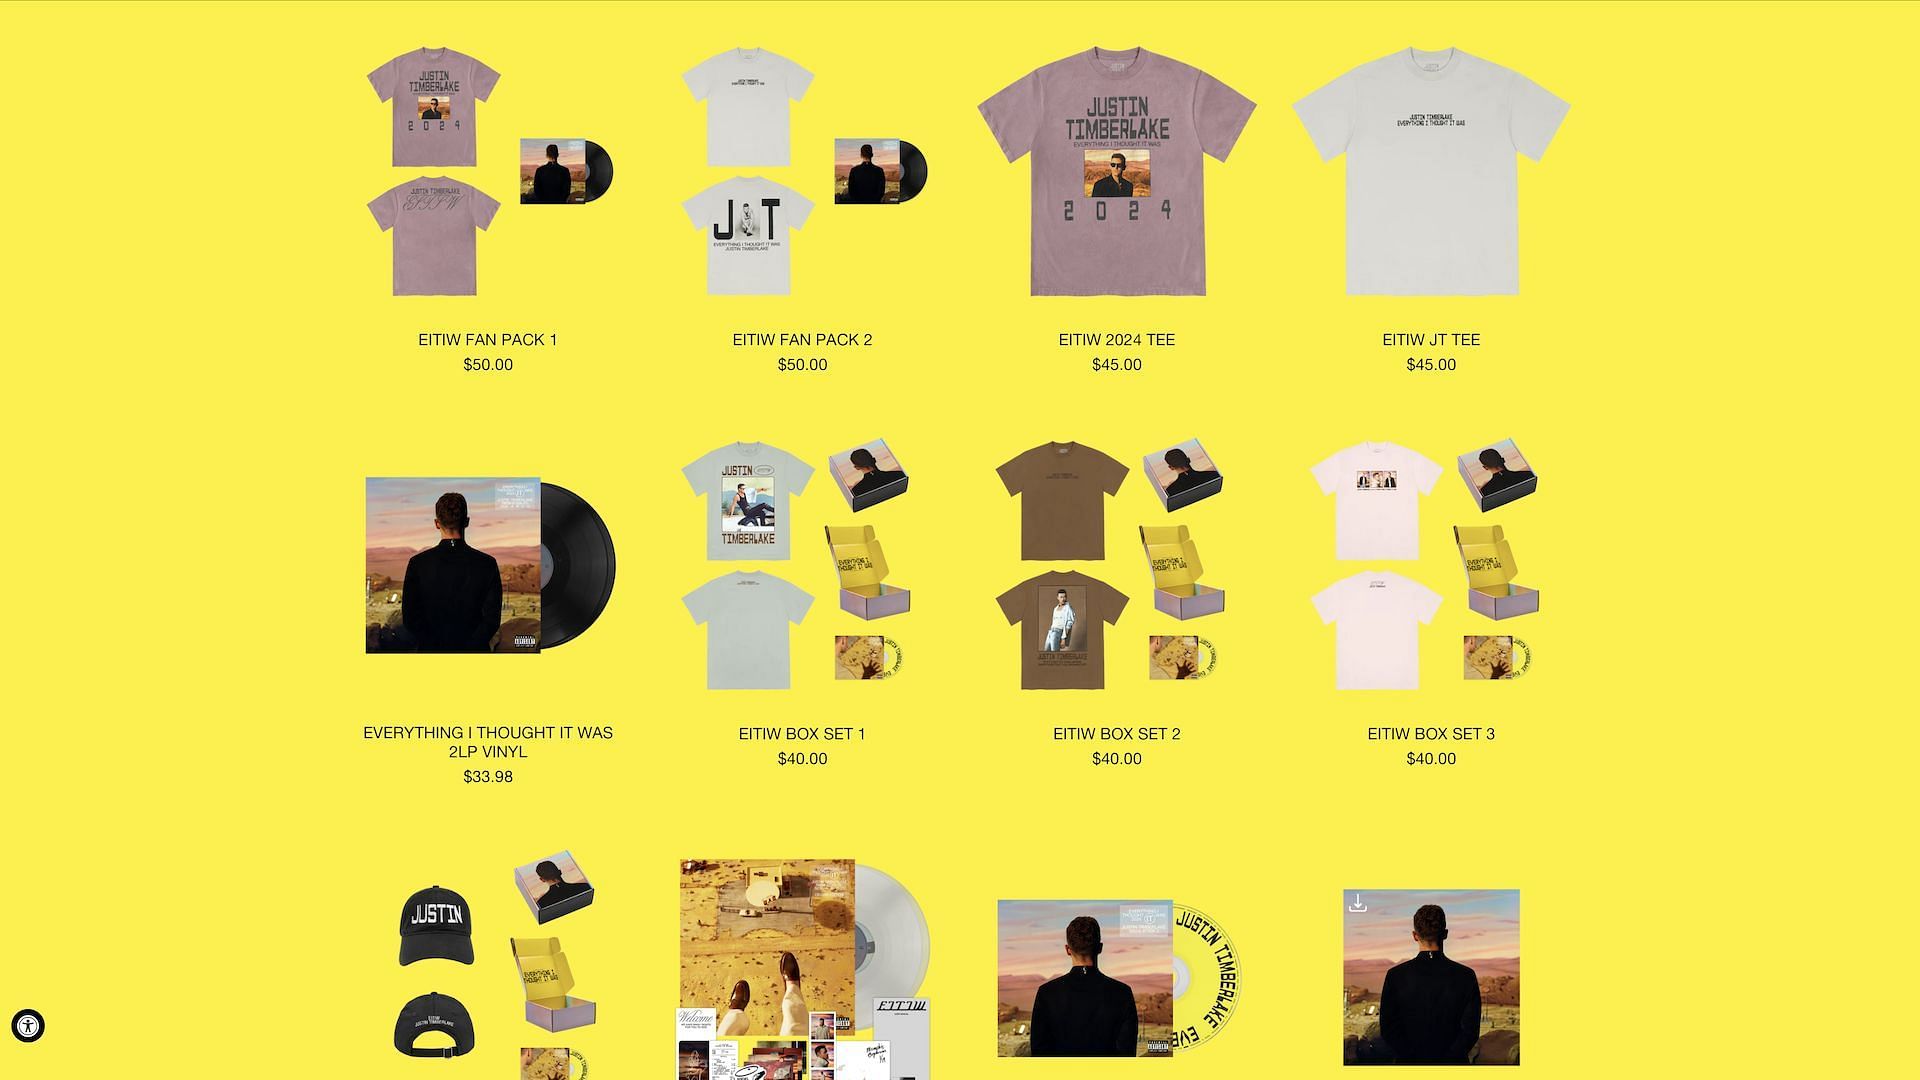 &#039;Everything I Thought It Was&#039; album merch and box sets available on Justin Timberlake&#039;s official website (Image via shop.justintimberlake.com)